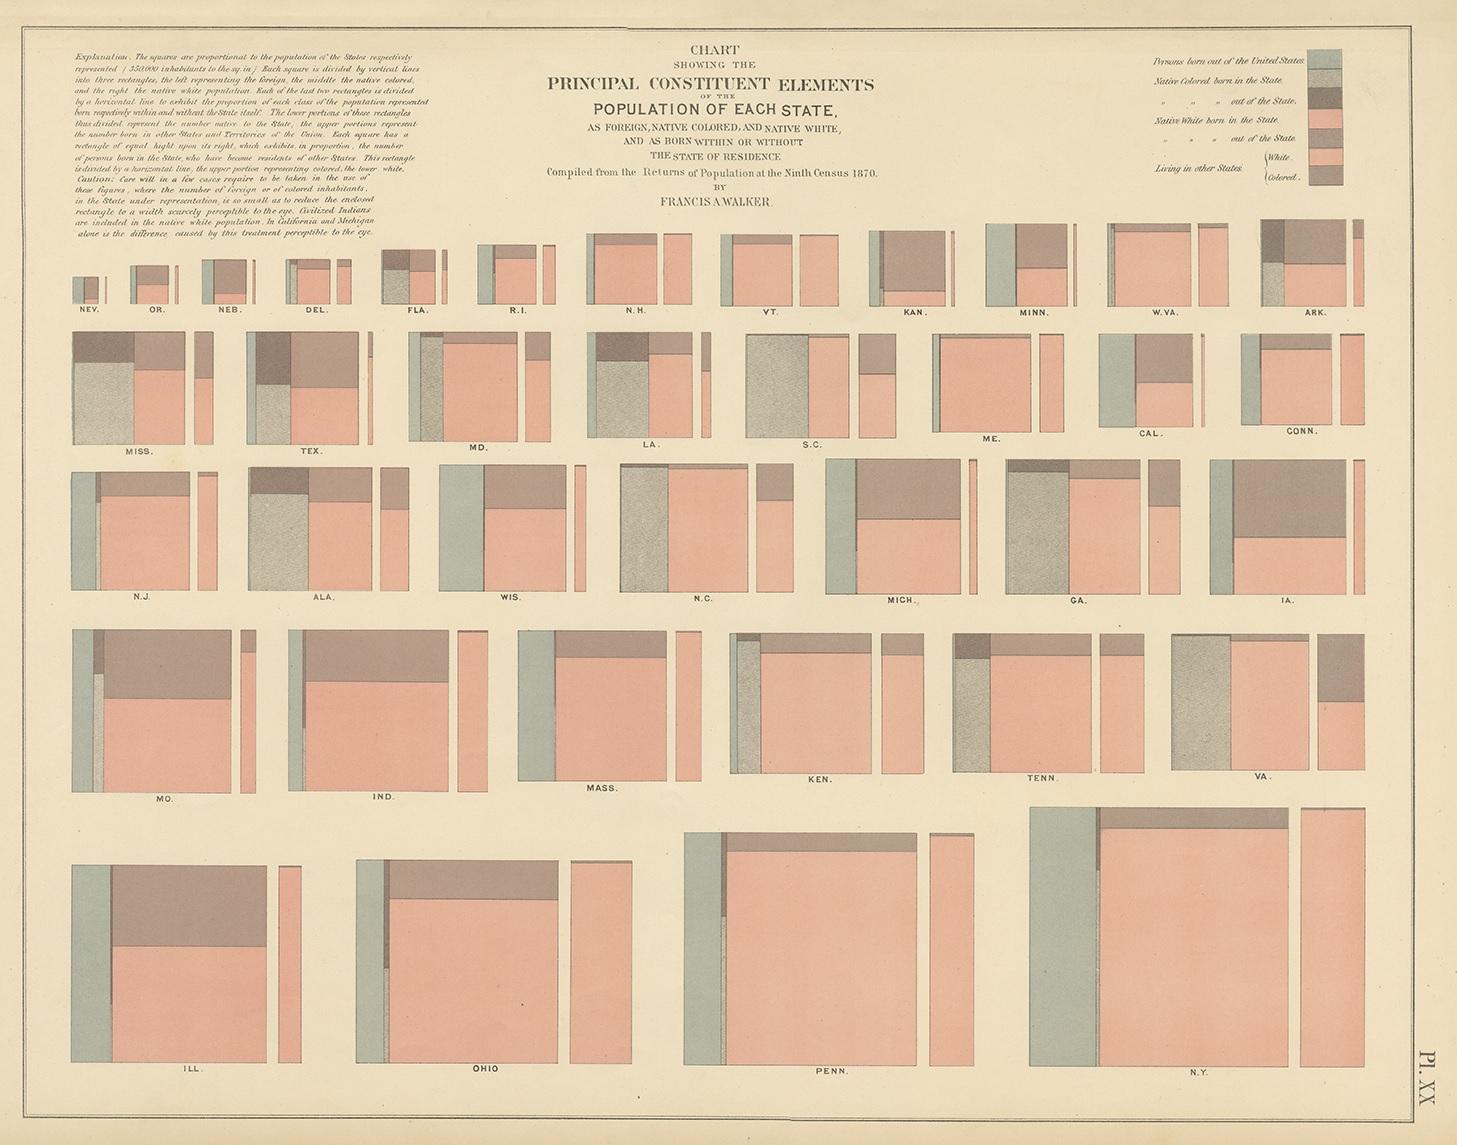 Antique chart titled 'Chart showing the principal constitutional elements of the population of each state, as foreign, native, colored, and native white, and as born within or without the state of residence'. This chart shows the population of each